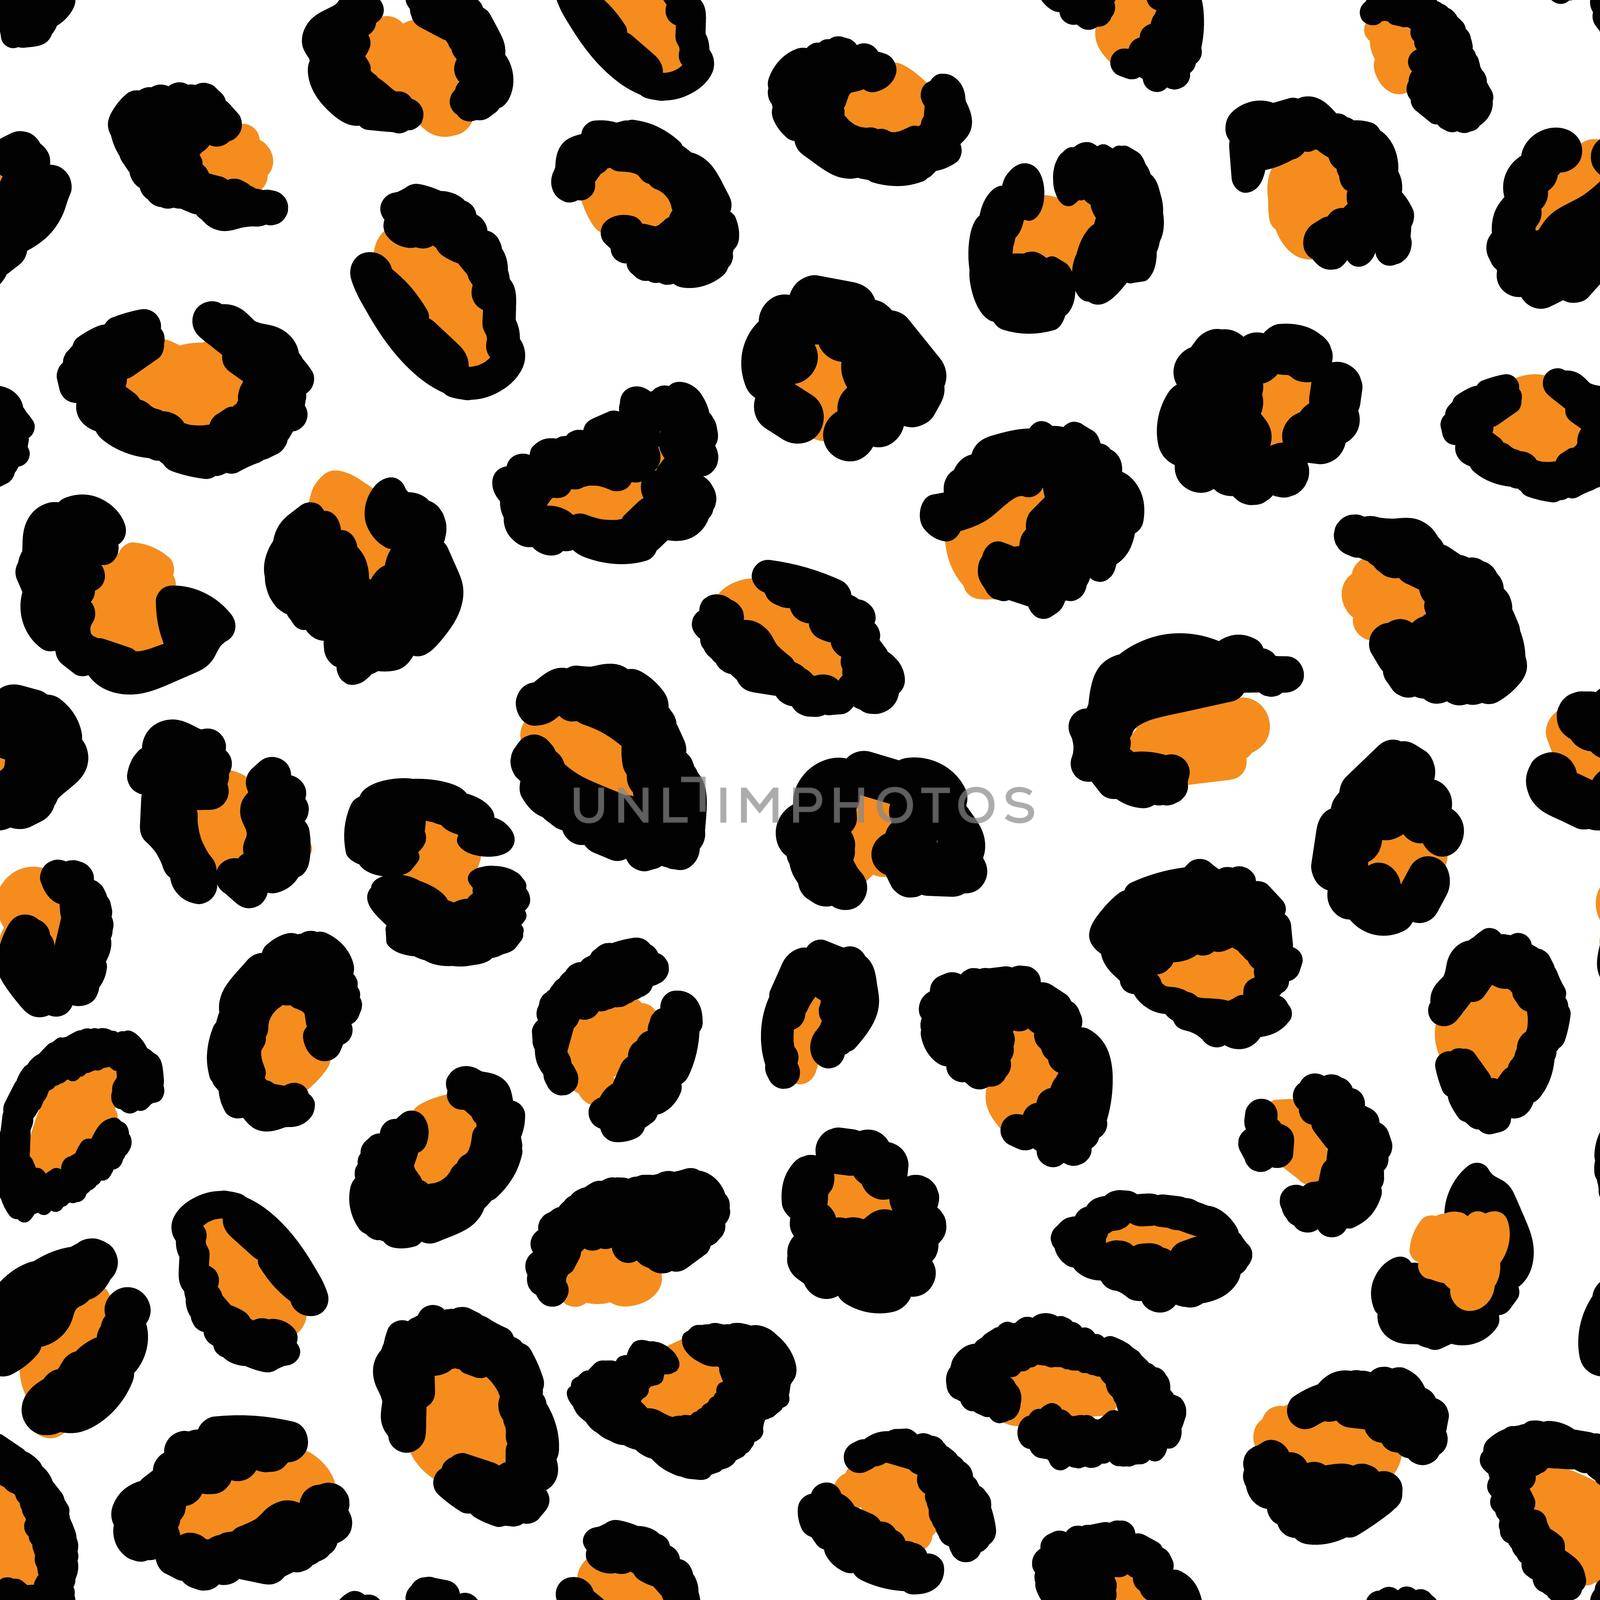 Abstract modern leopard seamless pattern. Animals trendy background. Black and white decorative vector illustration for print, card, postcard, fabric, textile. Modern ornament of stylized skin by allaku